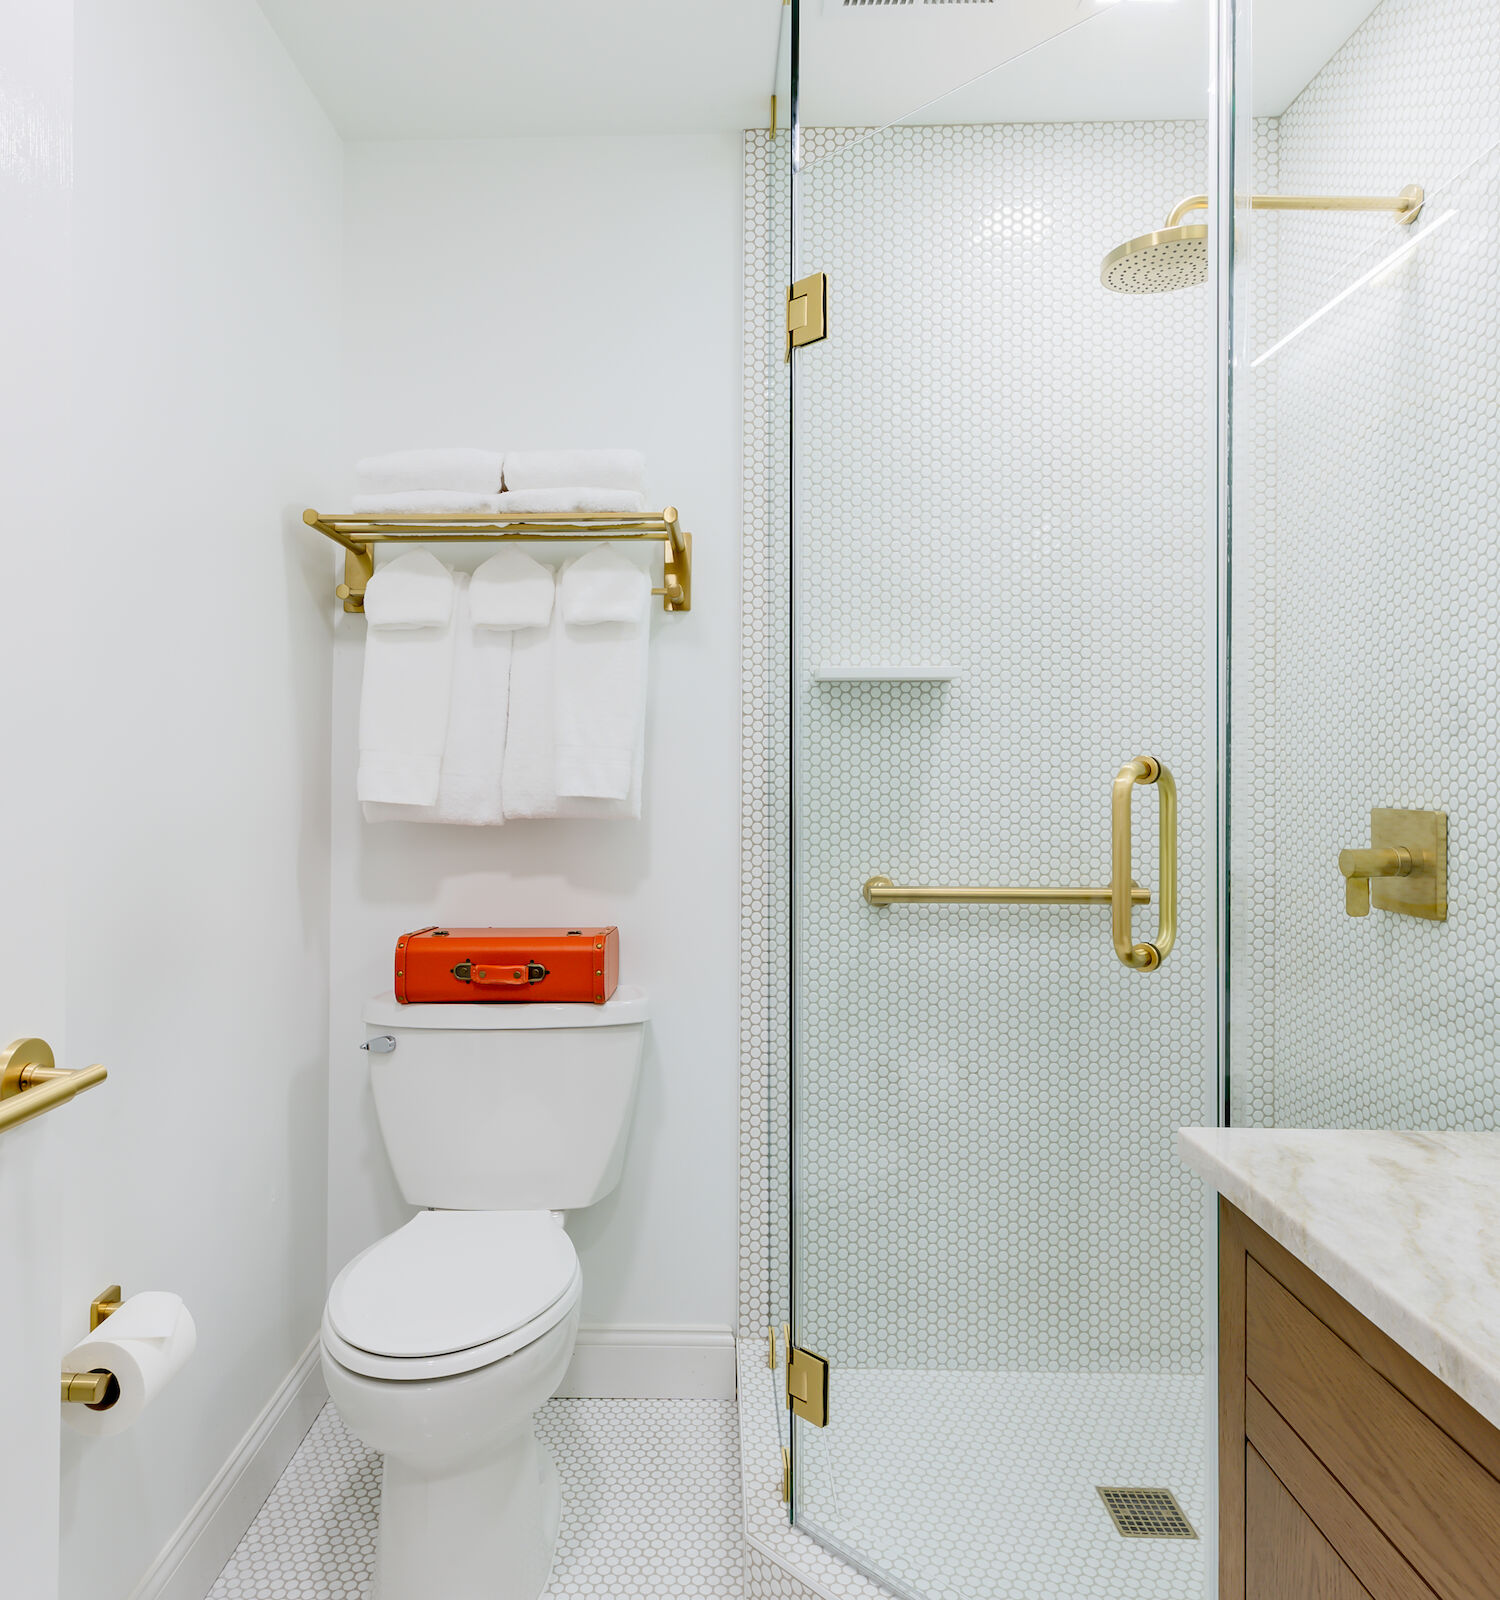 A modern bathroom with a glass shower enclosure, gold fixtures, a toilet with towels above, a sink with a countertop, and a roll of toilet paper.